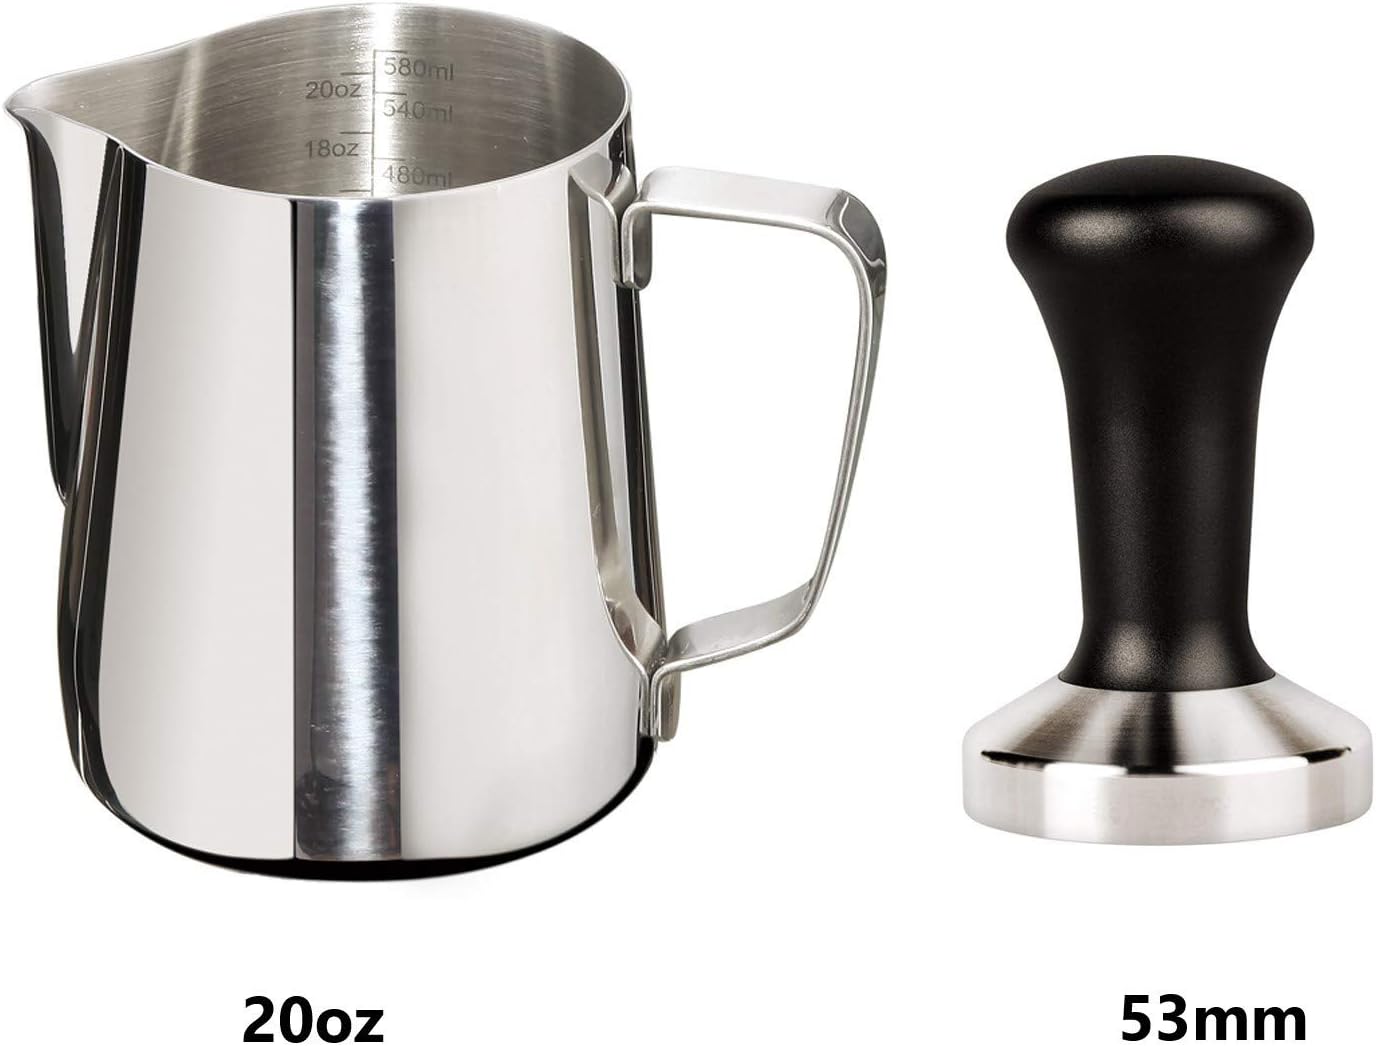 Joytata 20oz Milk Frothing Pitcher 53mm Stainless Steel Espresso Tamper Set-Milk Pitcher with Measurement Scale,Stainless Steel Steam Pitcher Coffee Tamper Set Perfect for Espresso Machine-Froth Cup